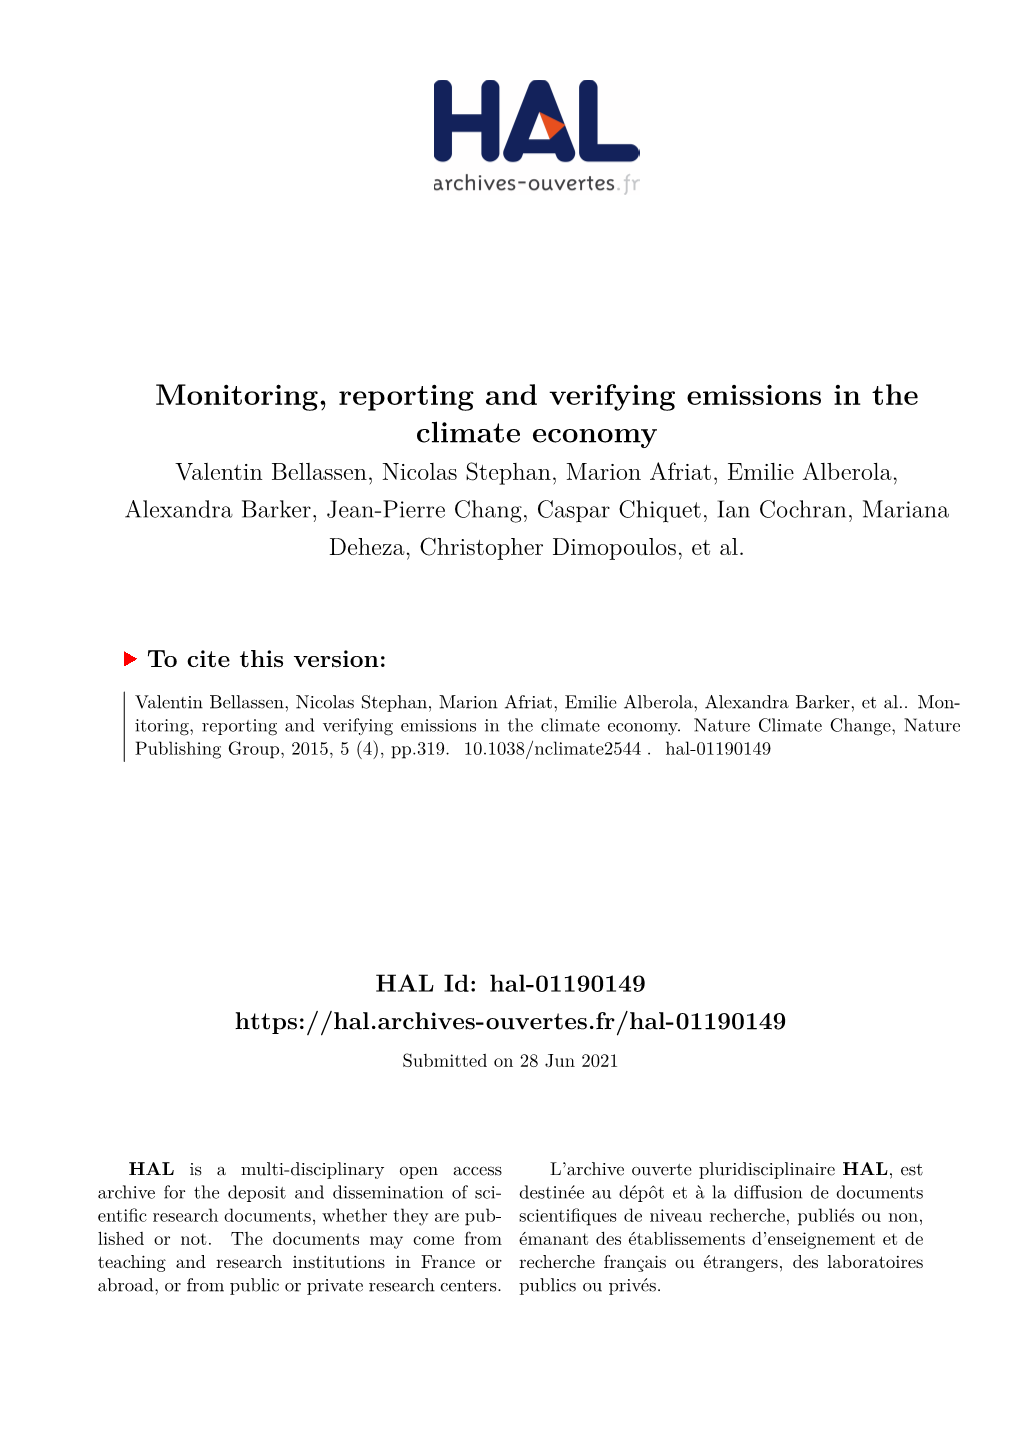 Monitoring, Reporting and Verifying Emissions in the Climate Economy